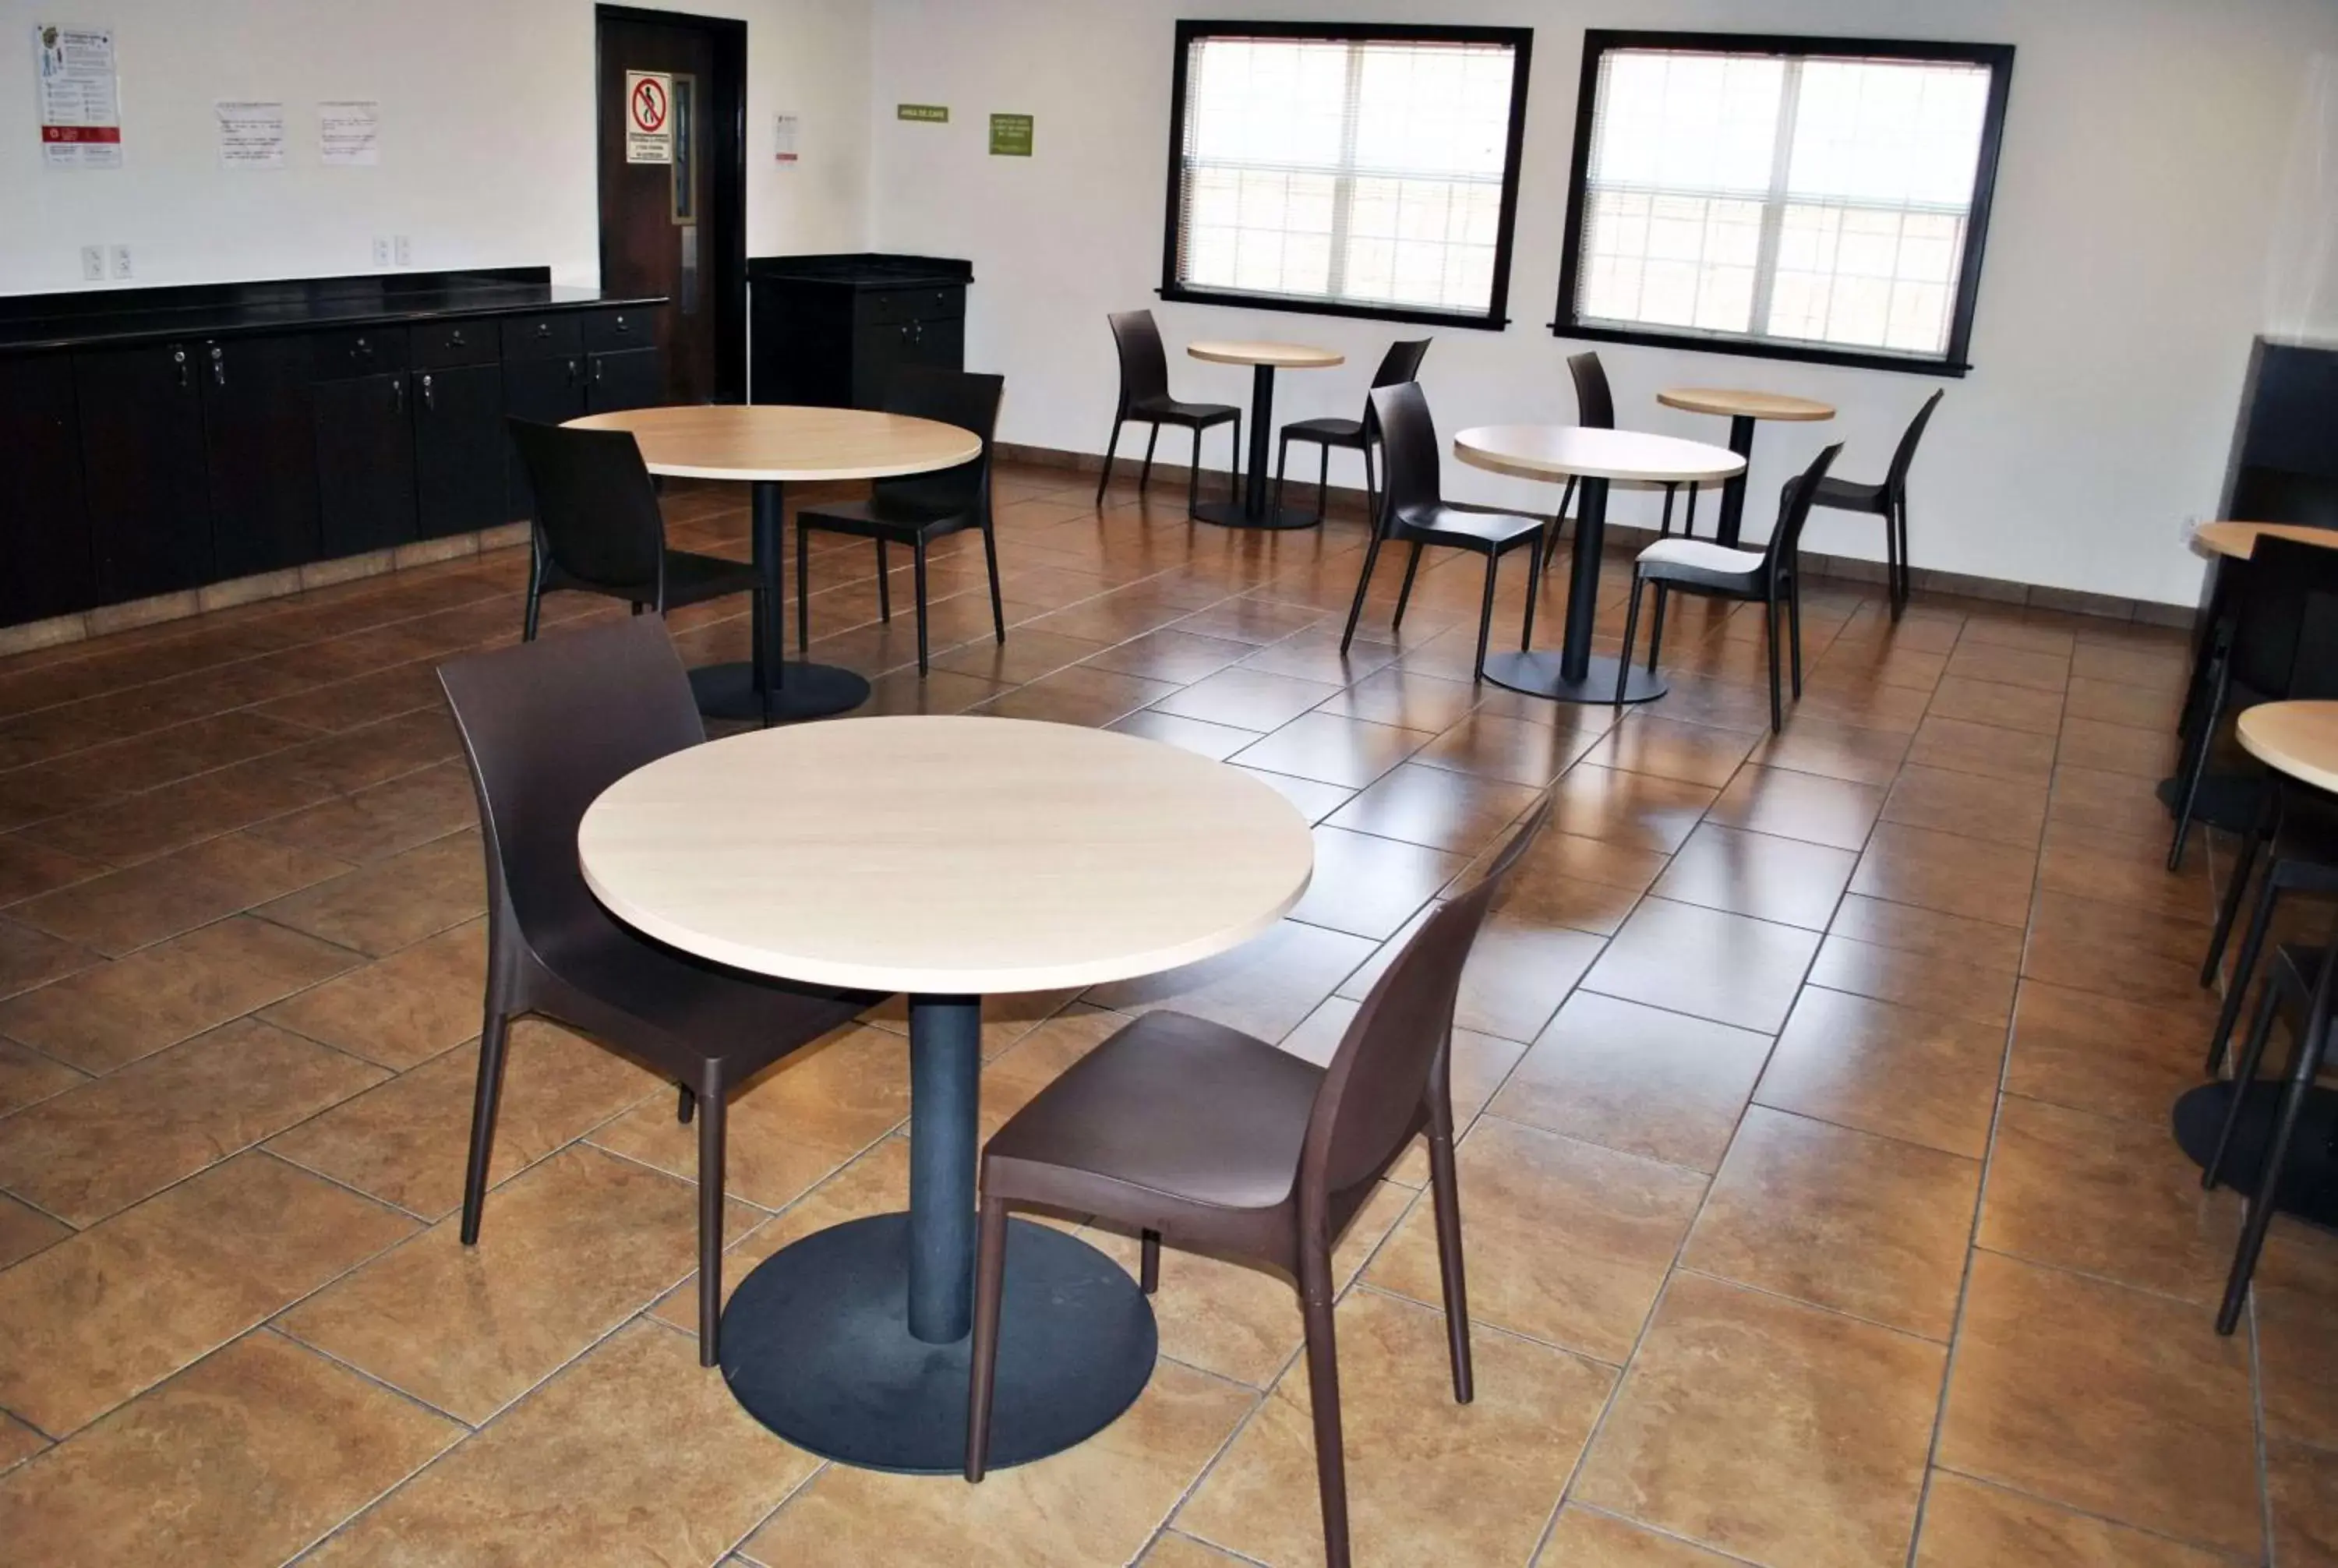 On site, Dining Area in Microtel Inn and Suites by Wyndham Toluca